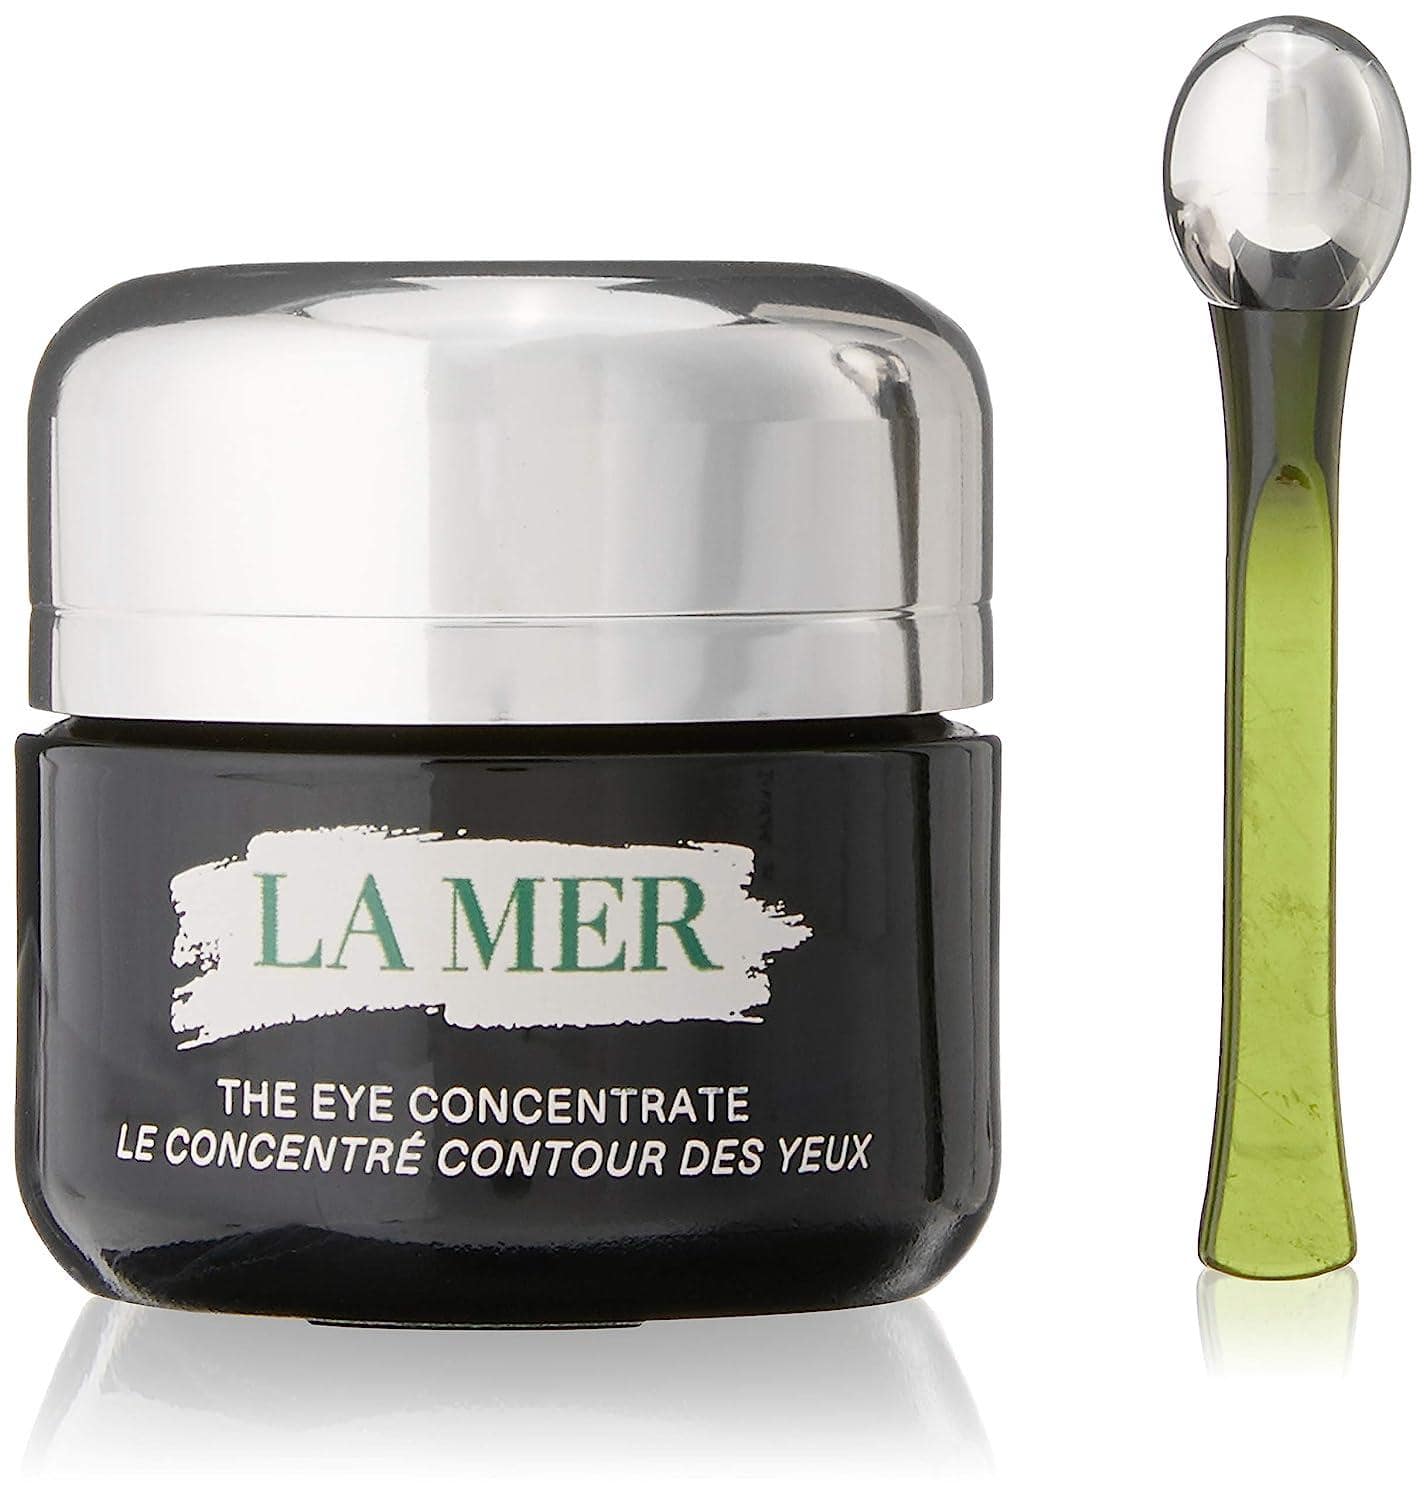 an anti-aging eye cream featuring a luxurious applicator. Experience paraben, sulfate, and phthalate-free skincare infused with La Mer's Miracle Broth for dark circles replenishment.
